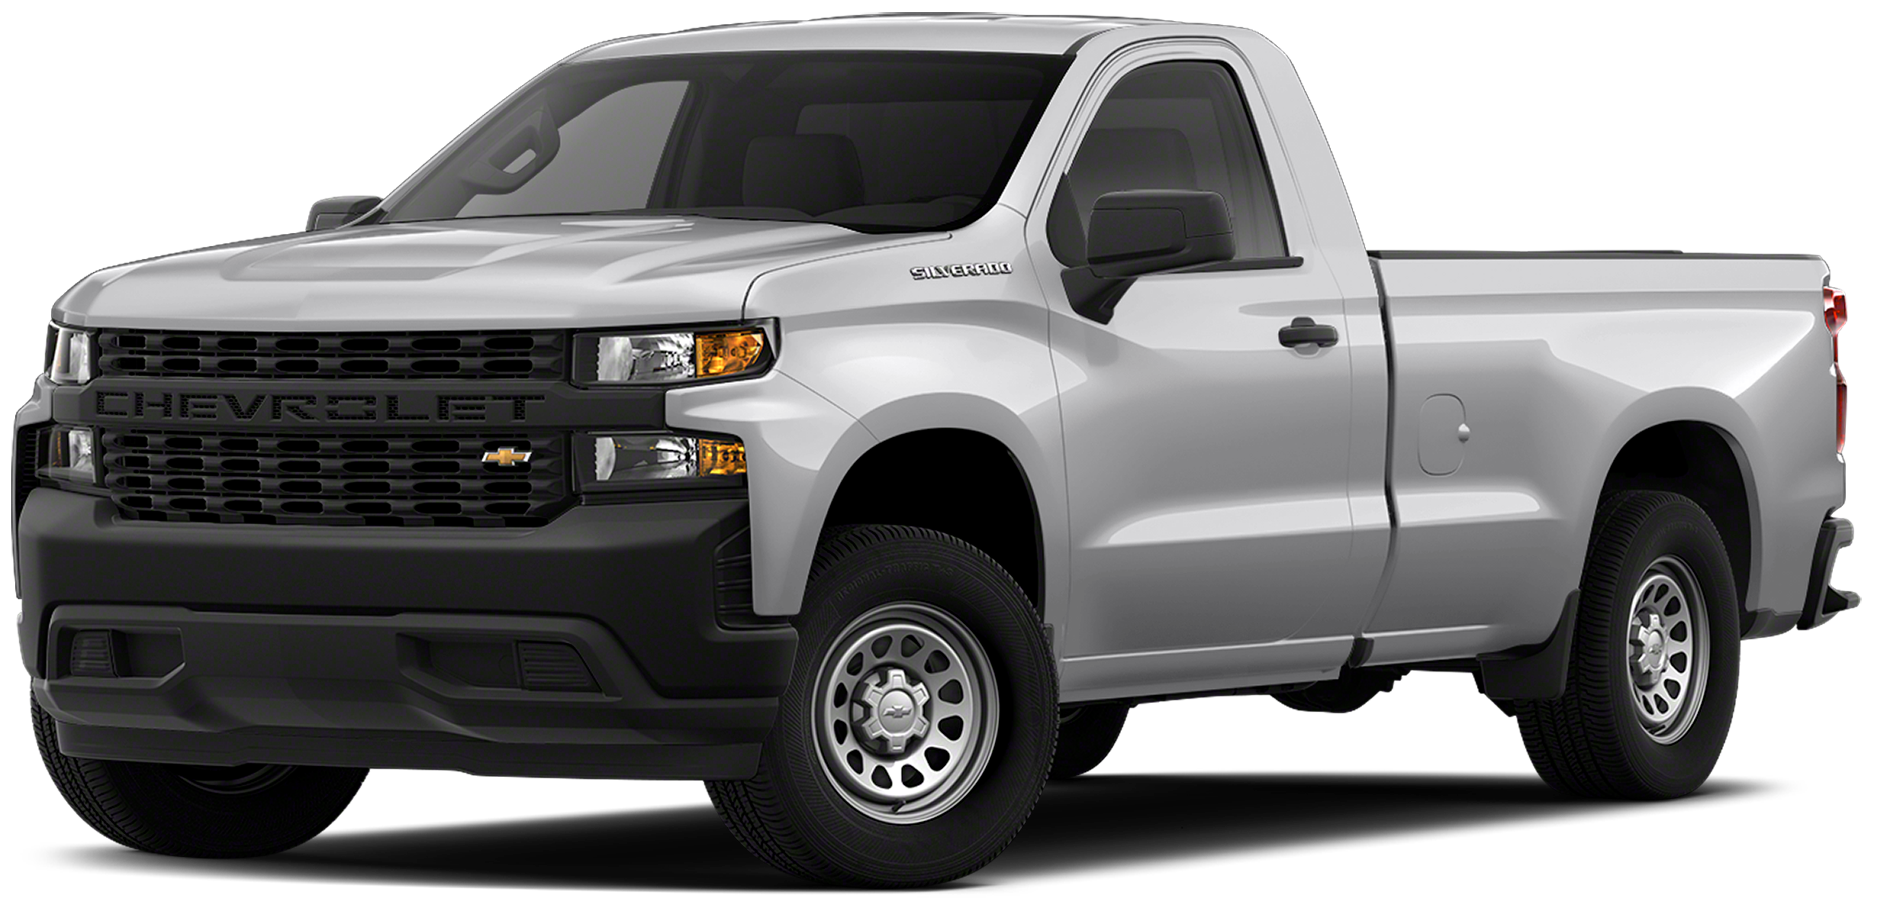 2019-chevrolet-silverado-1500-incentives-specials-offers-in-orchard